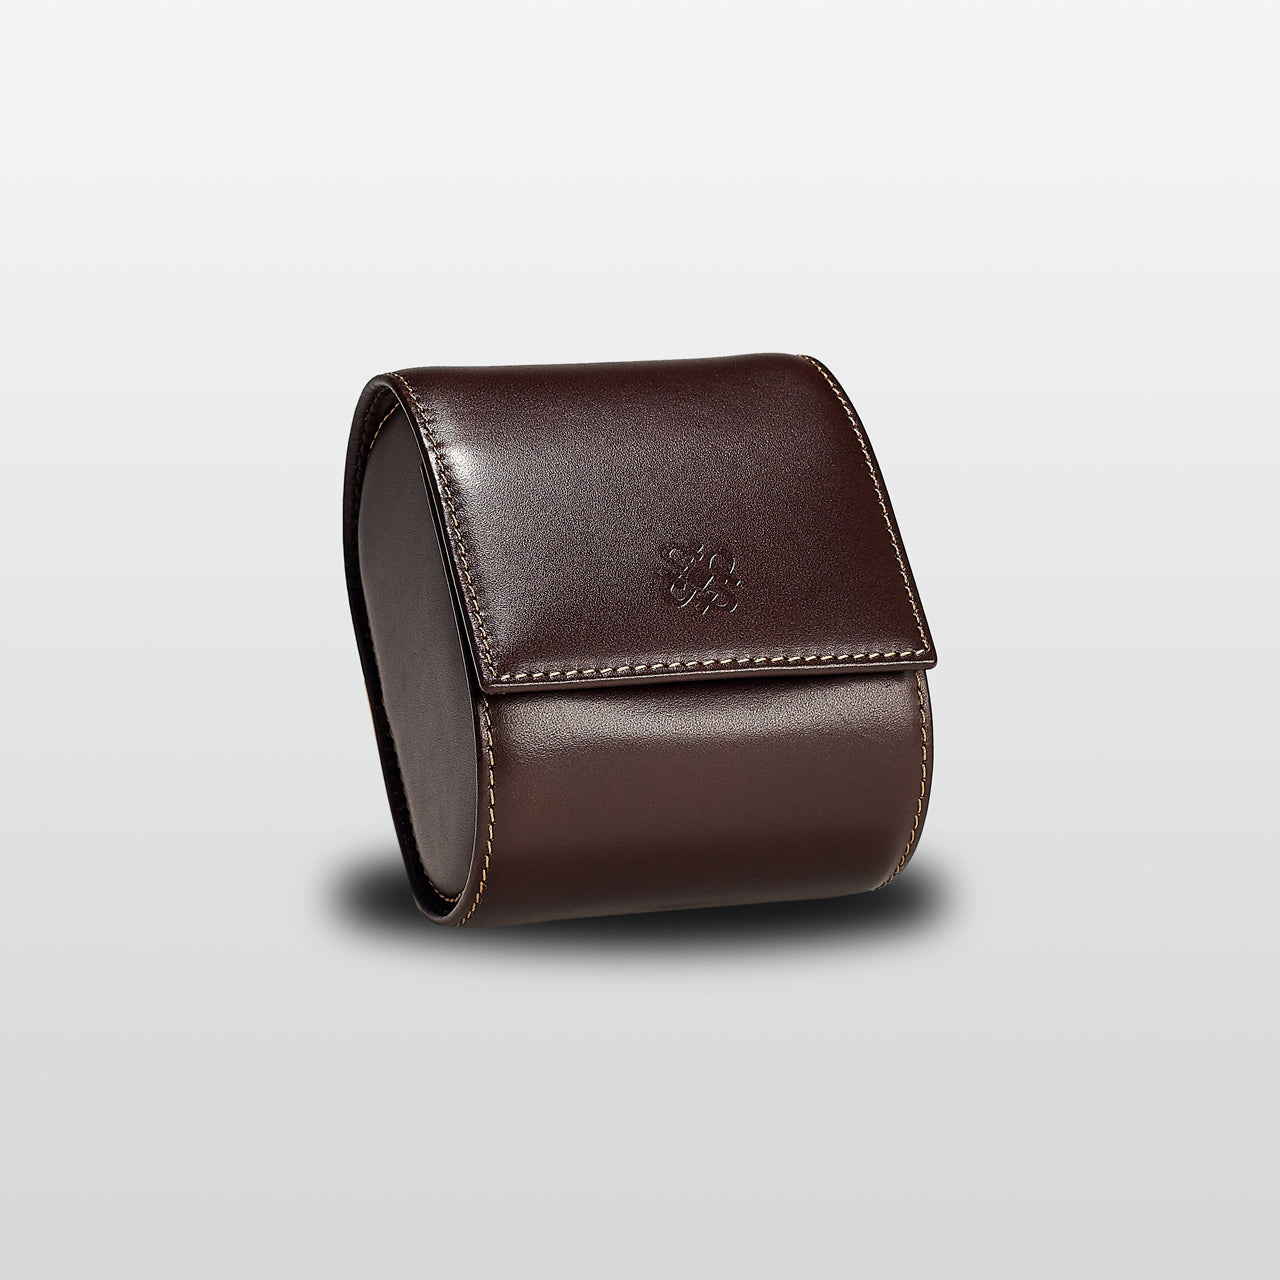 Precise Roll 900 - 1 Watch - BROWN